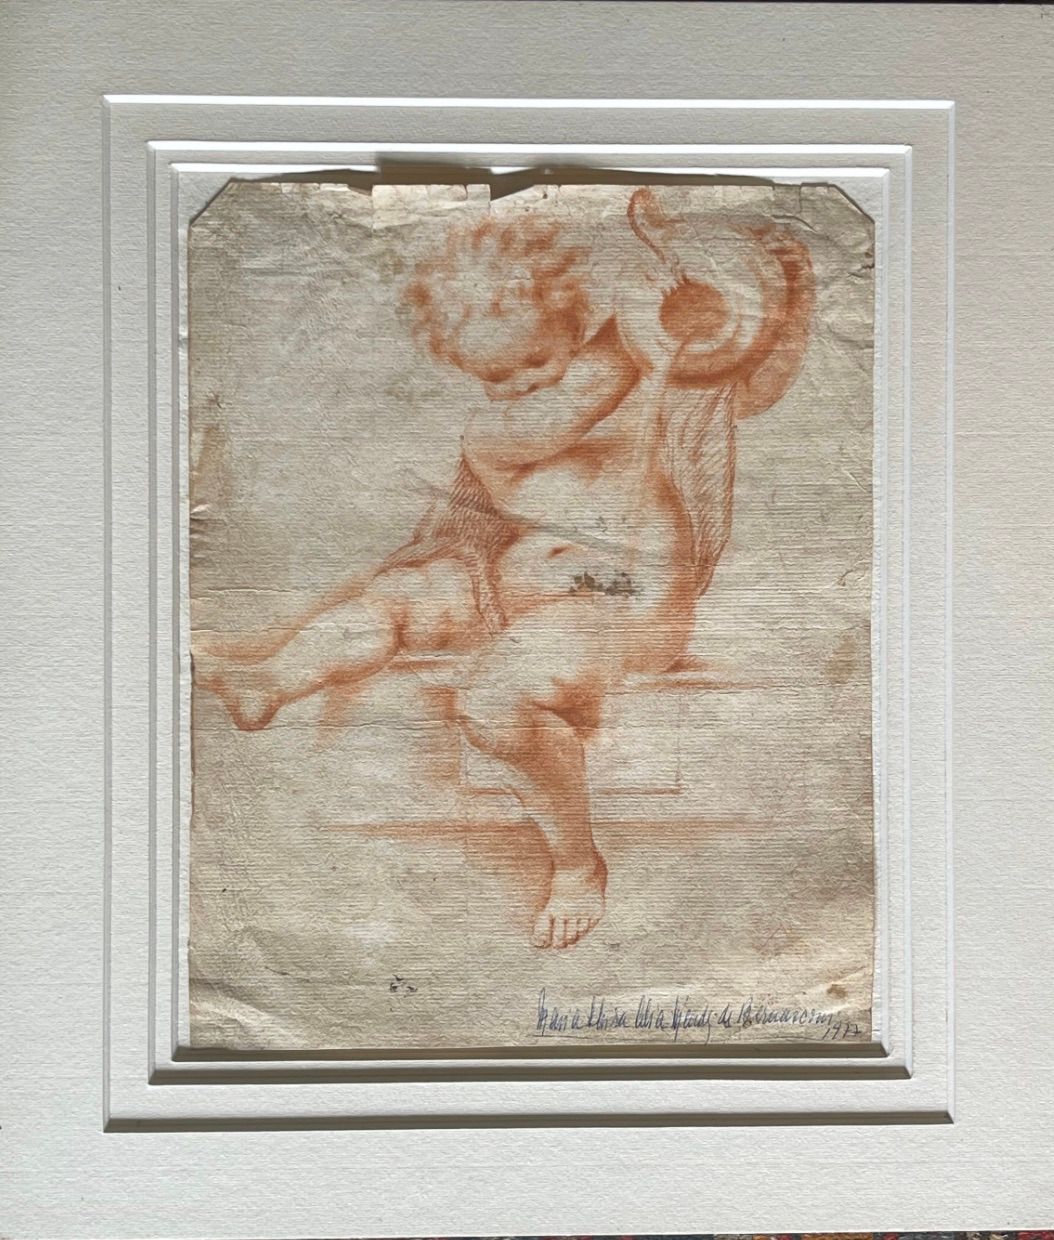 Italian School, 17th century, A Putto Holding a Vase, Red Chalk on Paper 意大利学校。1&hellip;